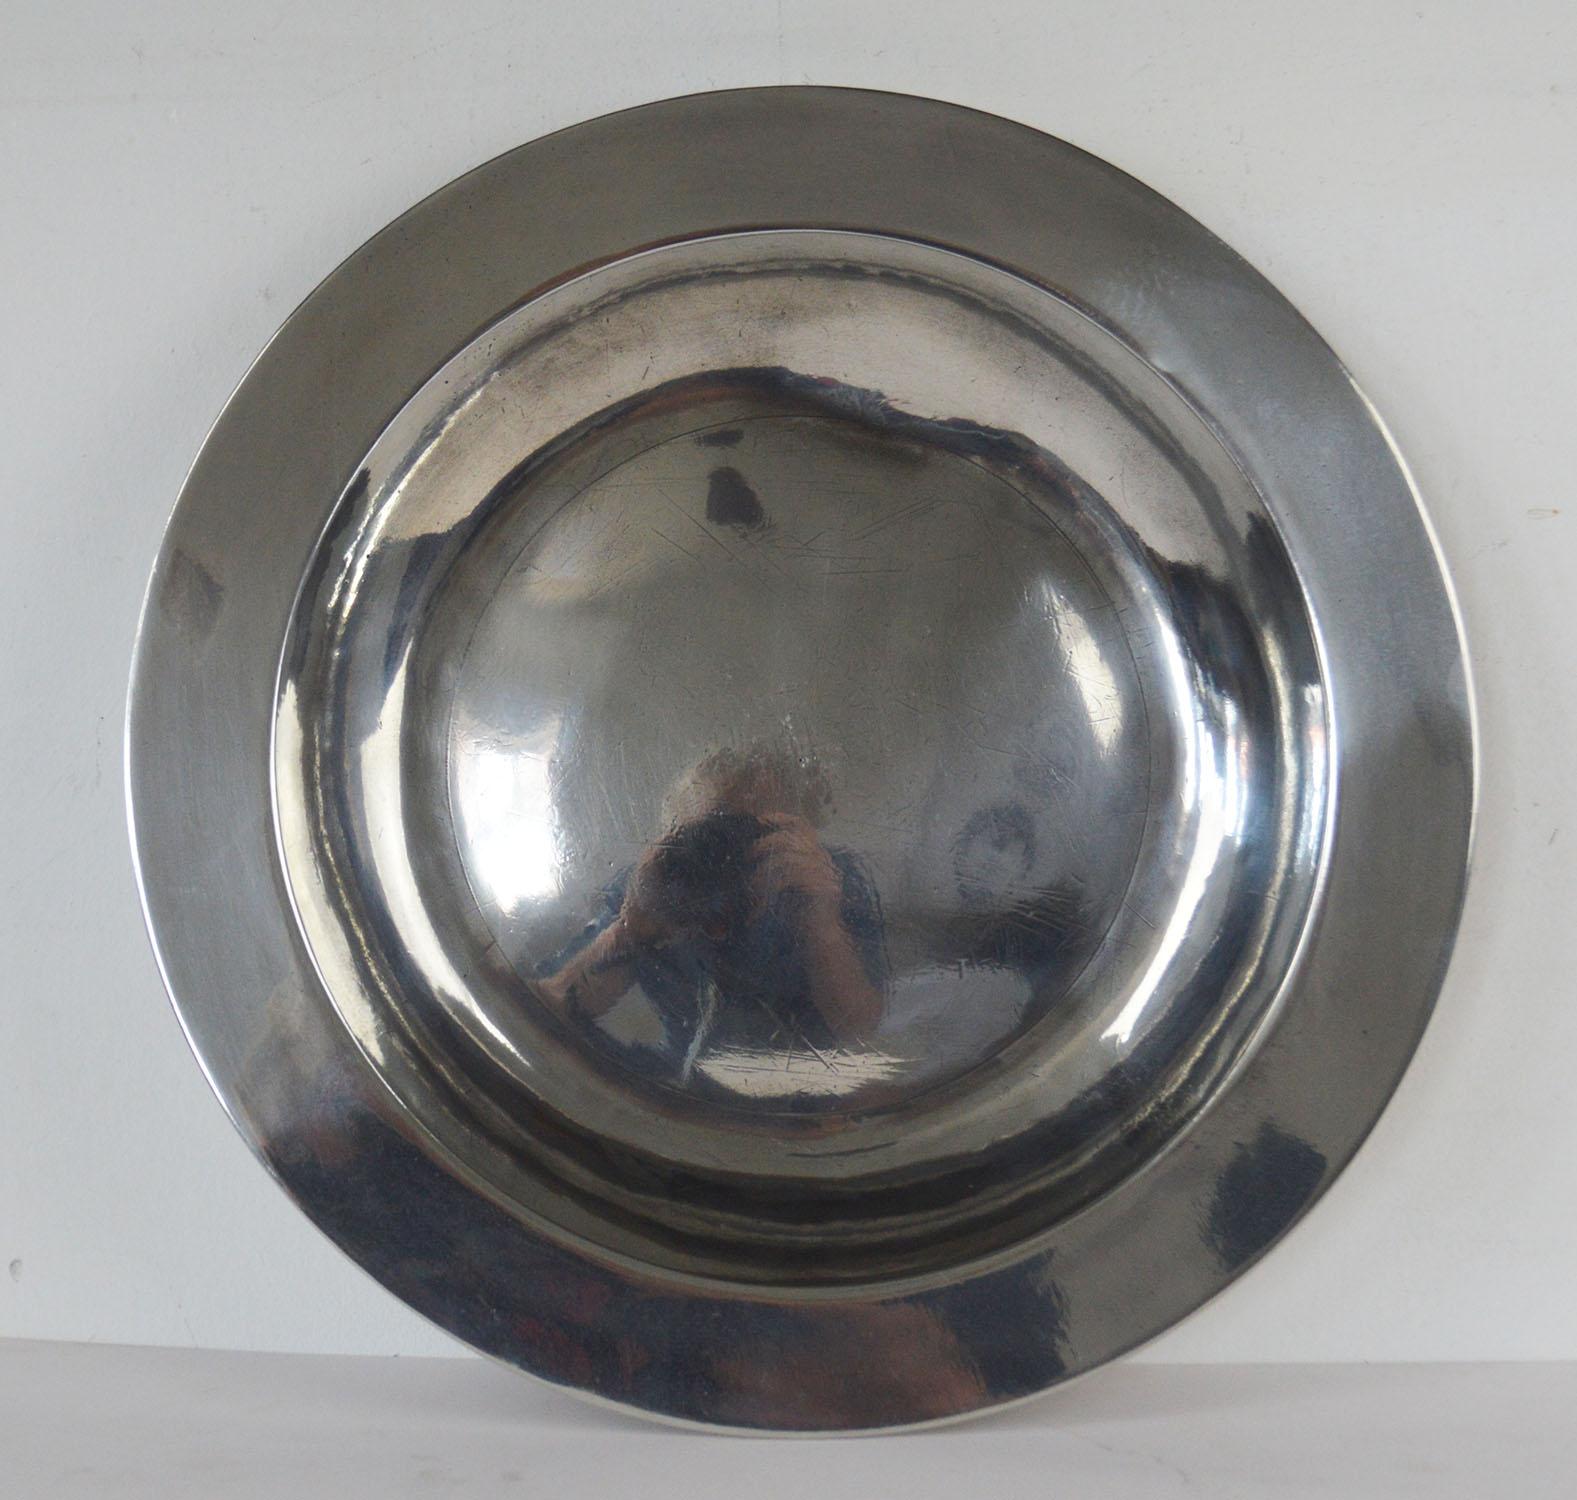 Wonderful highly polished dish. Measures: 13 inches.

English, late 18th century

The pewter has been polished to its original shine to imitate polished silver. It was known as the poor man's silver.

Rubbed touch marks on the underside.